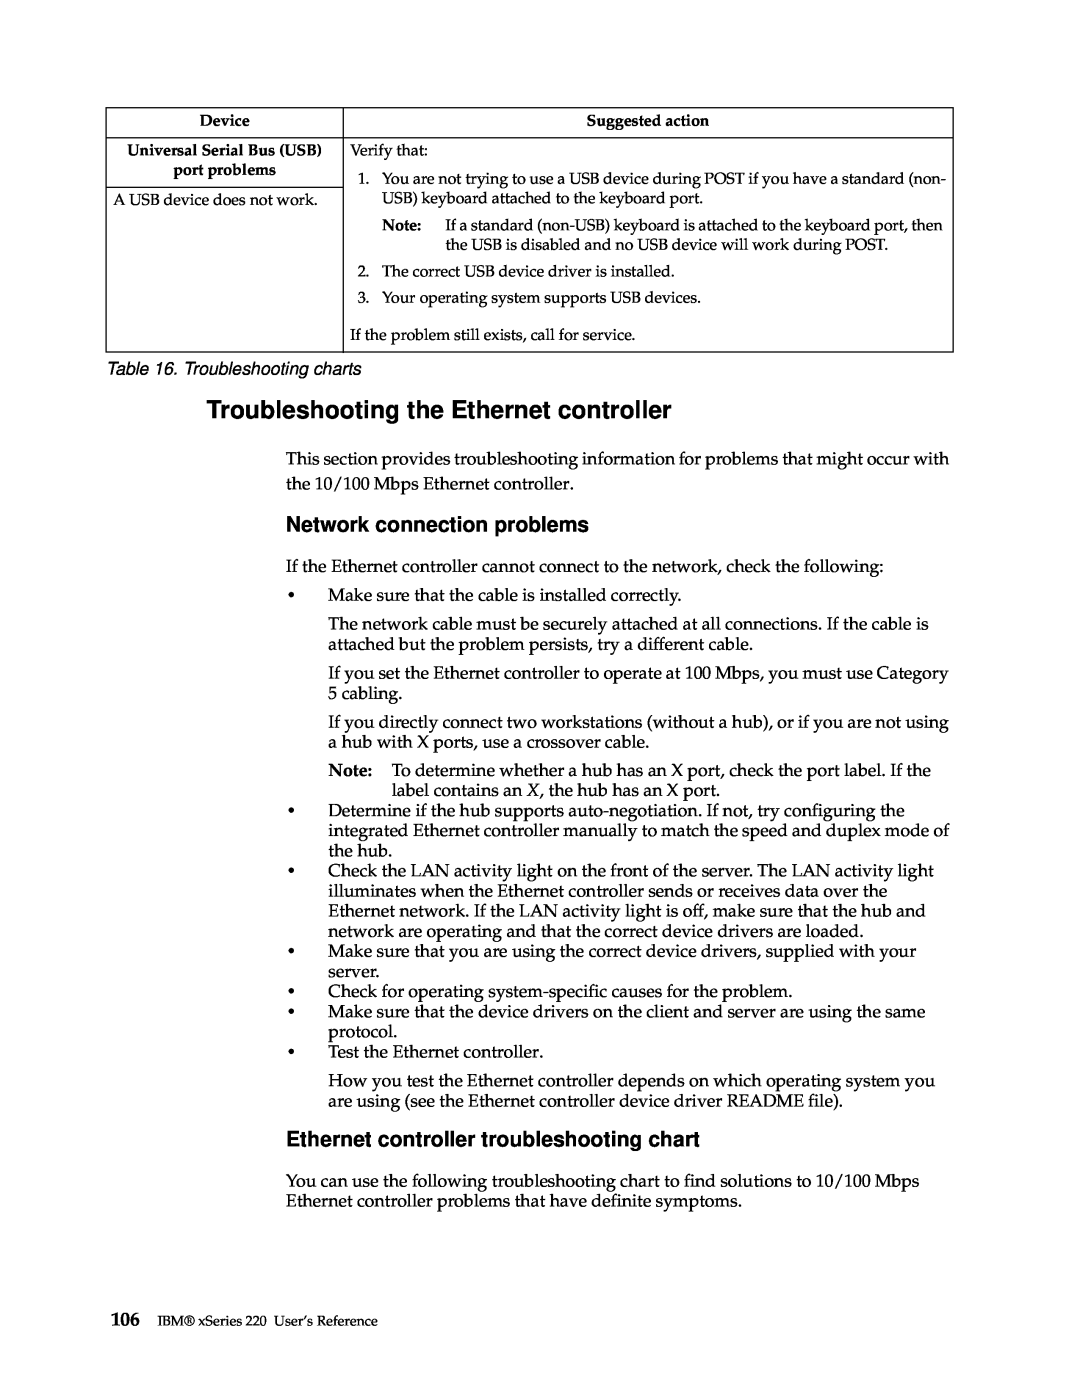 IBM 220 Troubleshooting the Ethernet controller, Network connection problems, Ethernet controller troubleshooting chart 